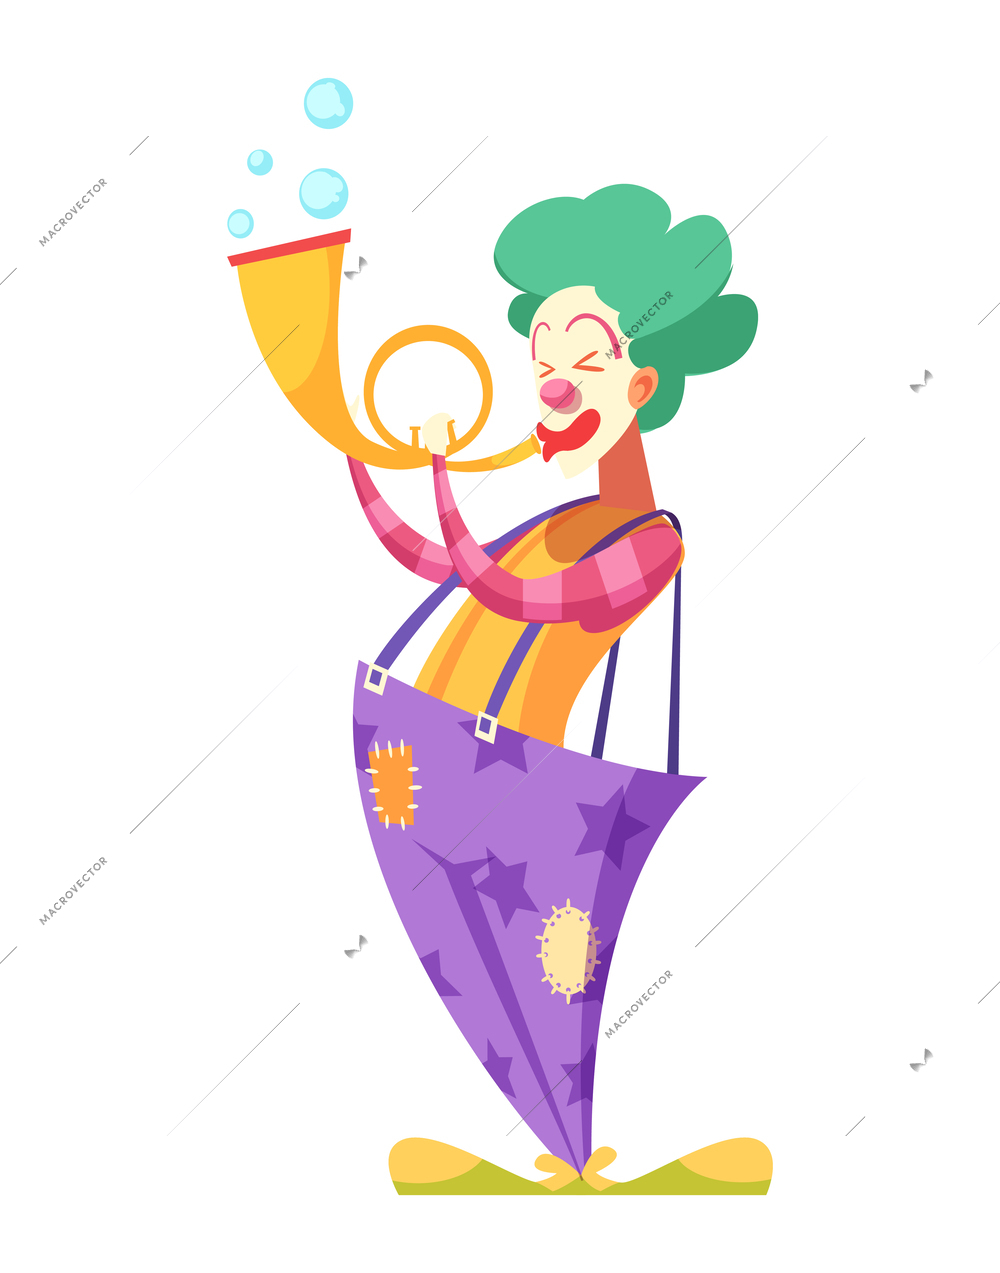 Funny clown with horn wearing baggy trousers cartoon vector illustration